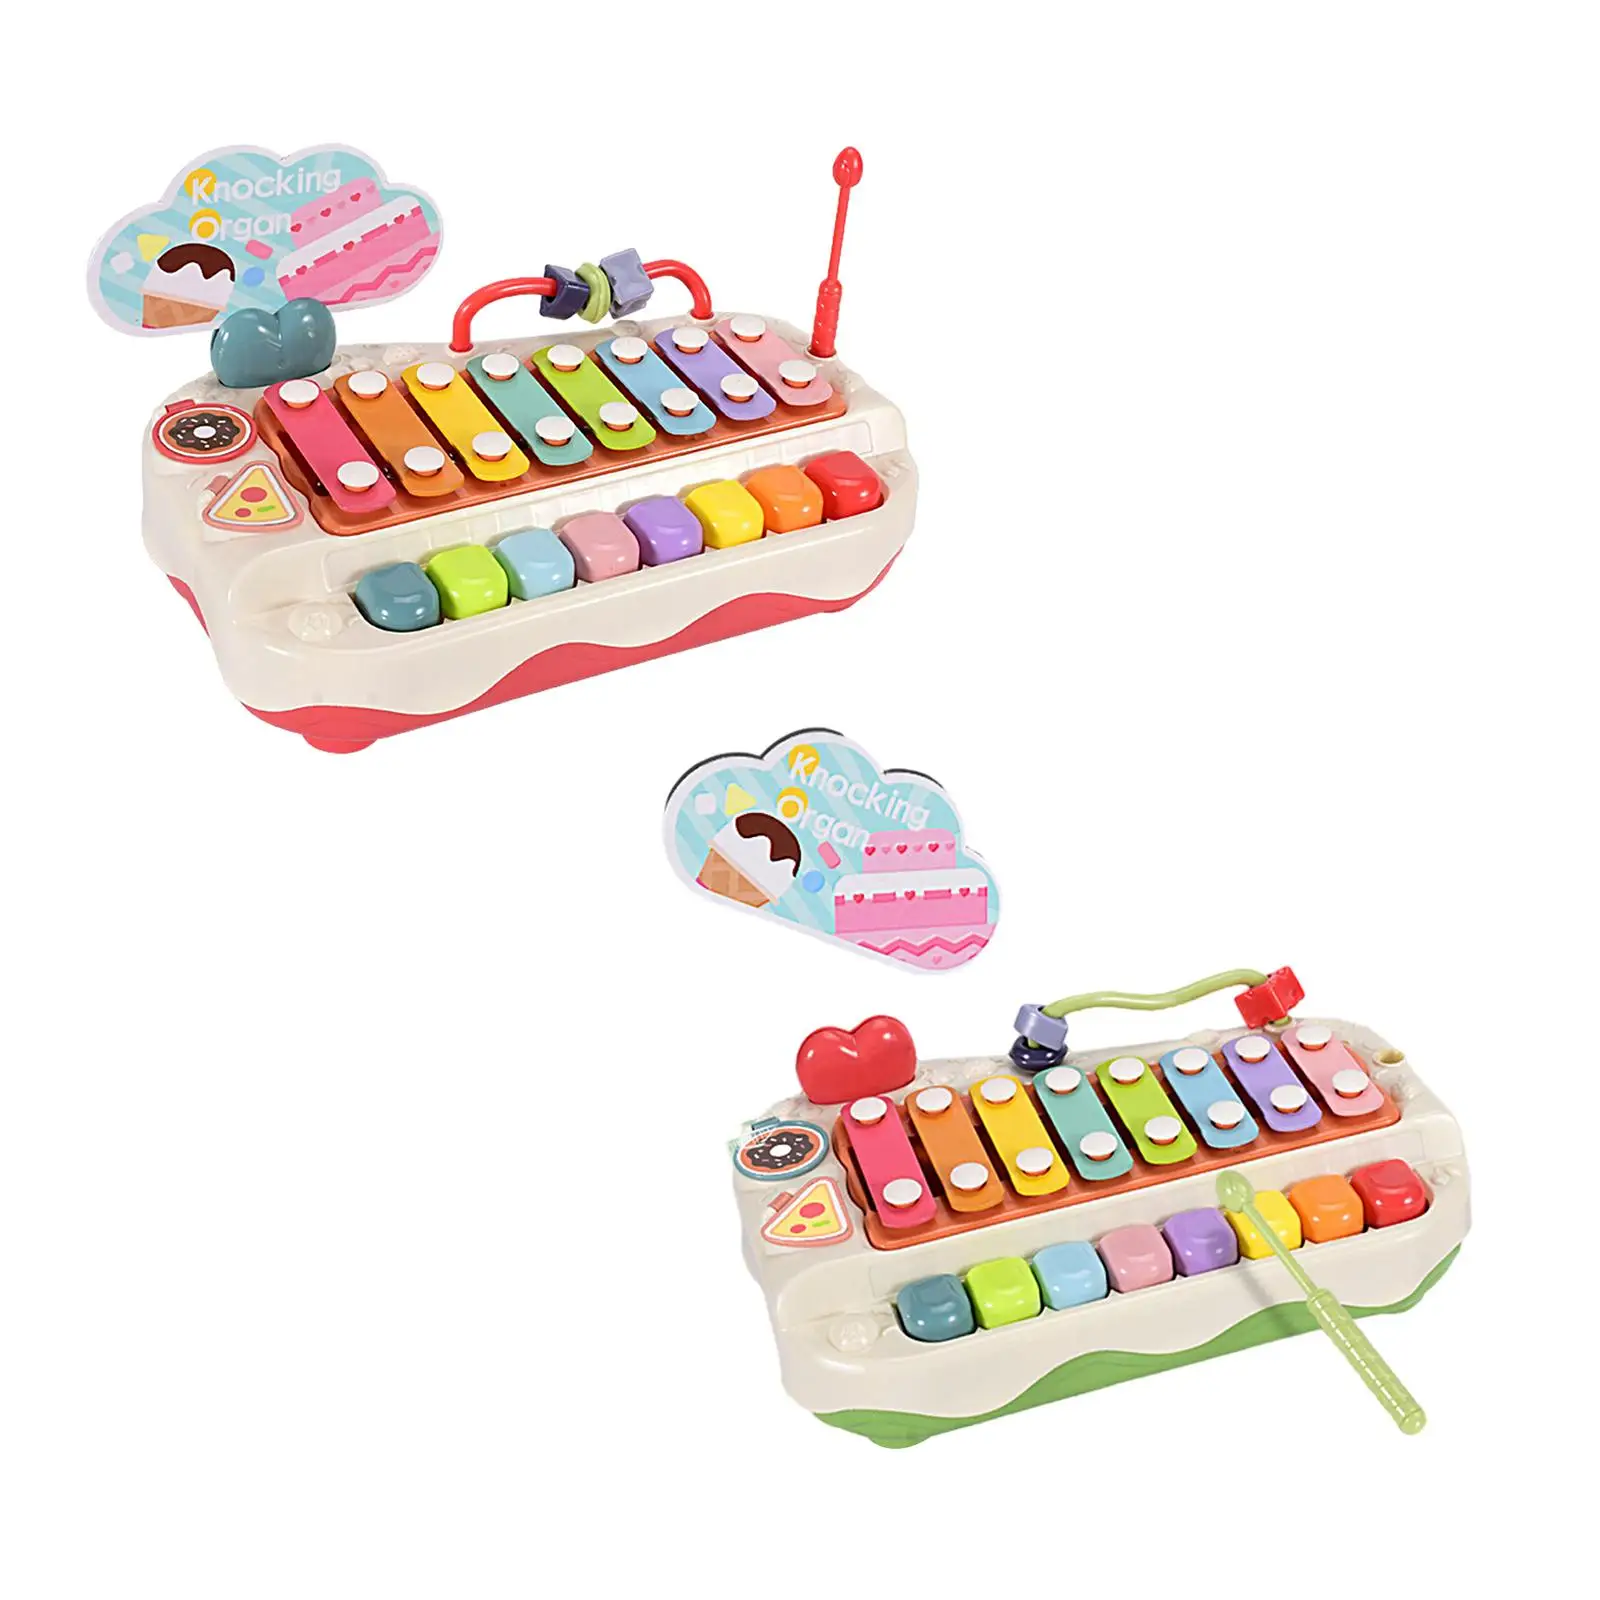 Musical Toy Multicolored Preschool Educational Motor Skills Musical Instrument Toy for Baby Boy Girls Kids 3+ Holiday Gifts